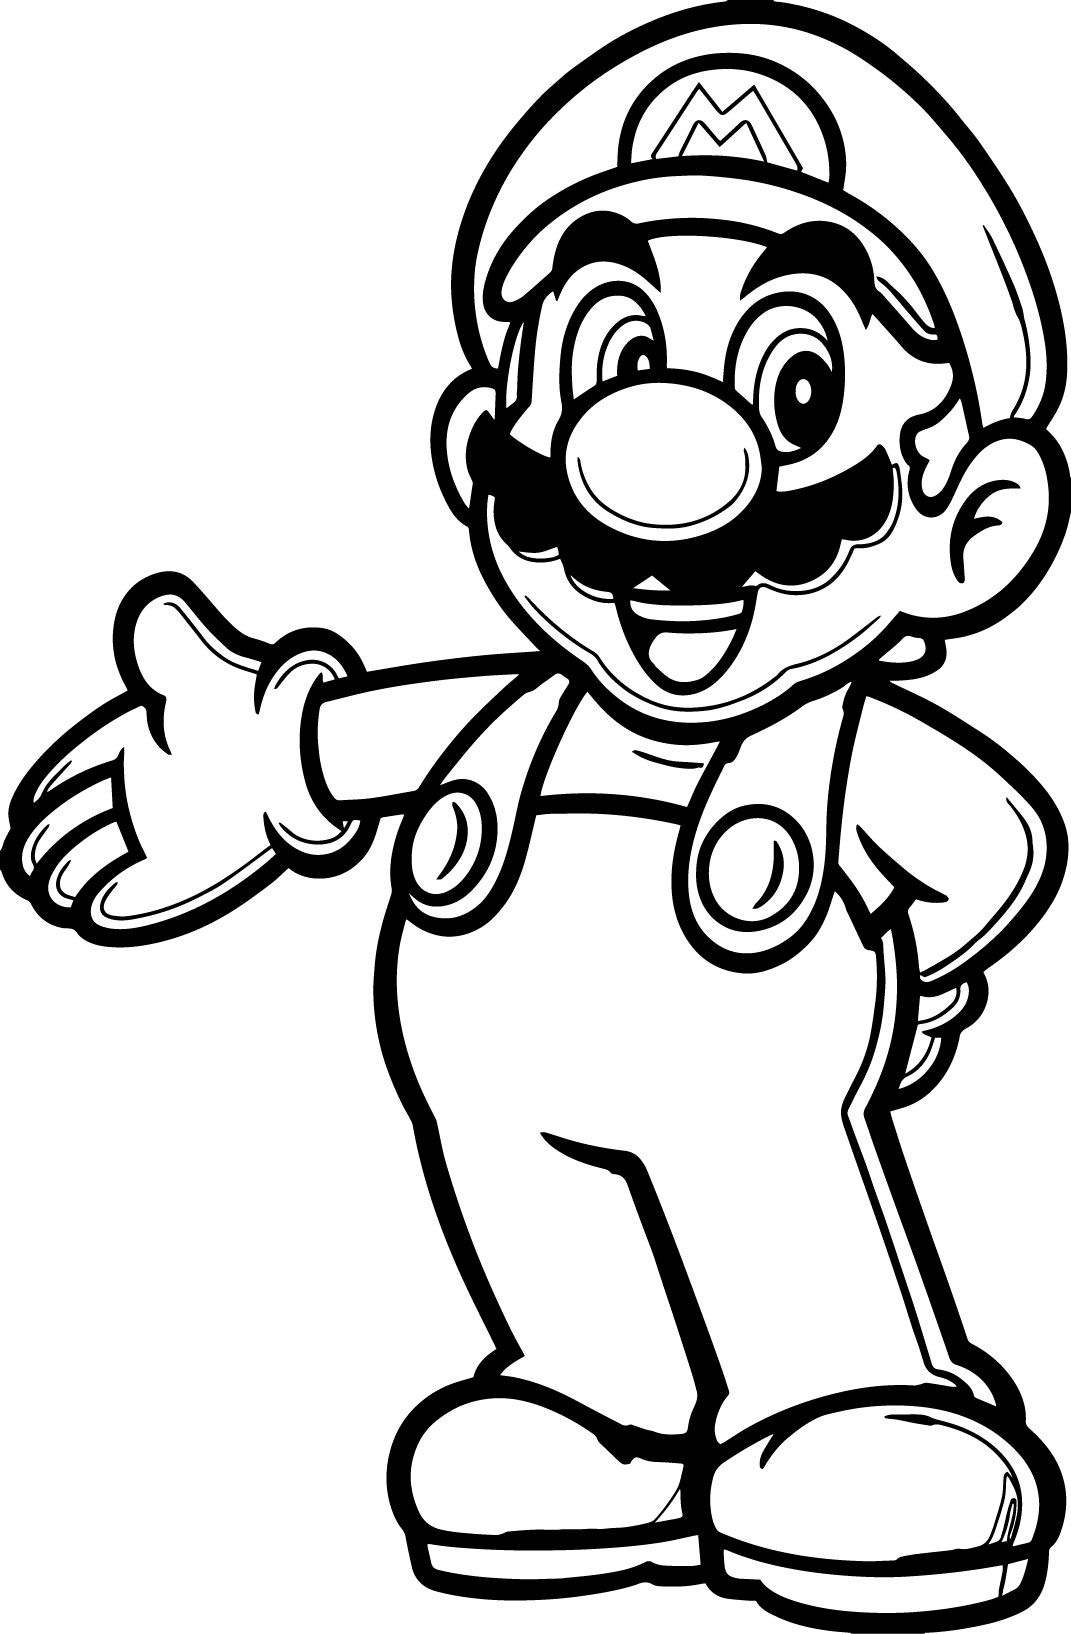 mario coloring pictures super mario coloring pages wecoloringpage pinterest mice pictures coloring mario 